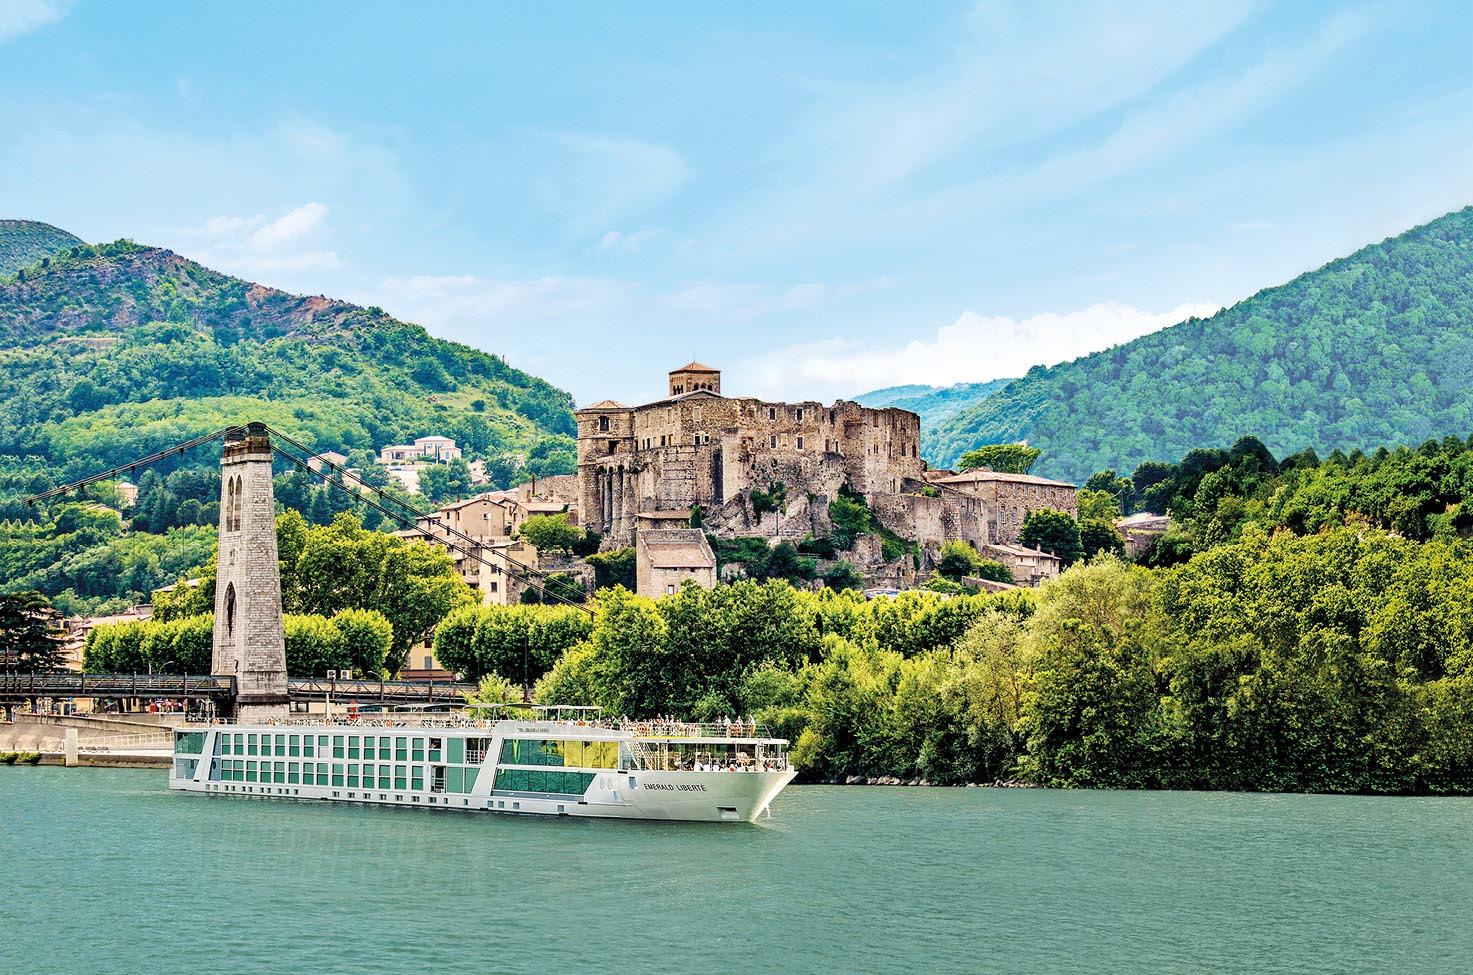 Luxury river ship sailing the Rhône River past an ancient castle in the South of France